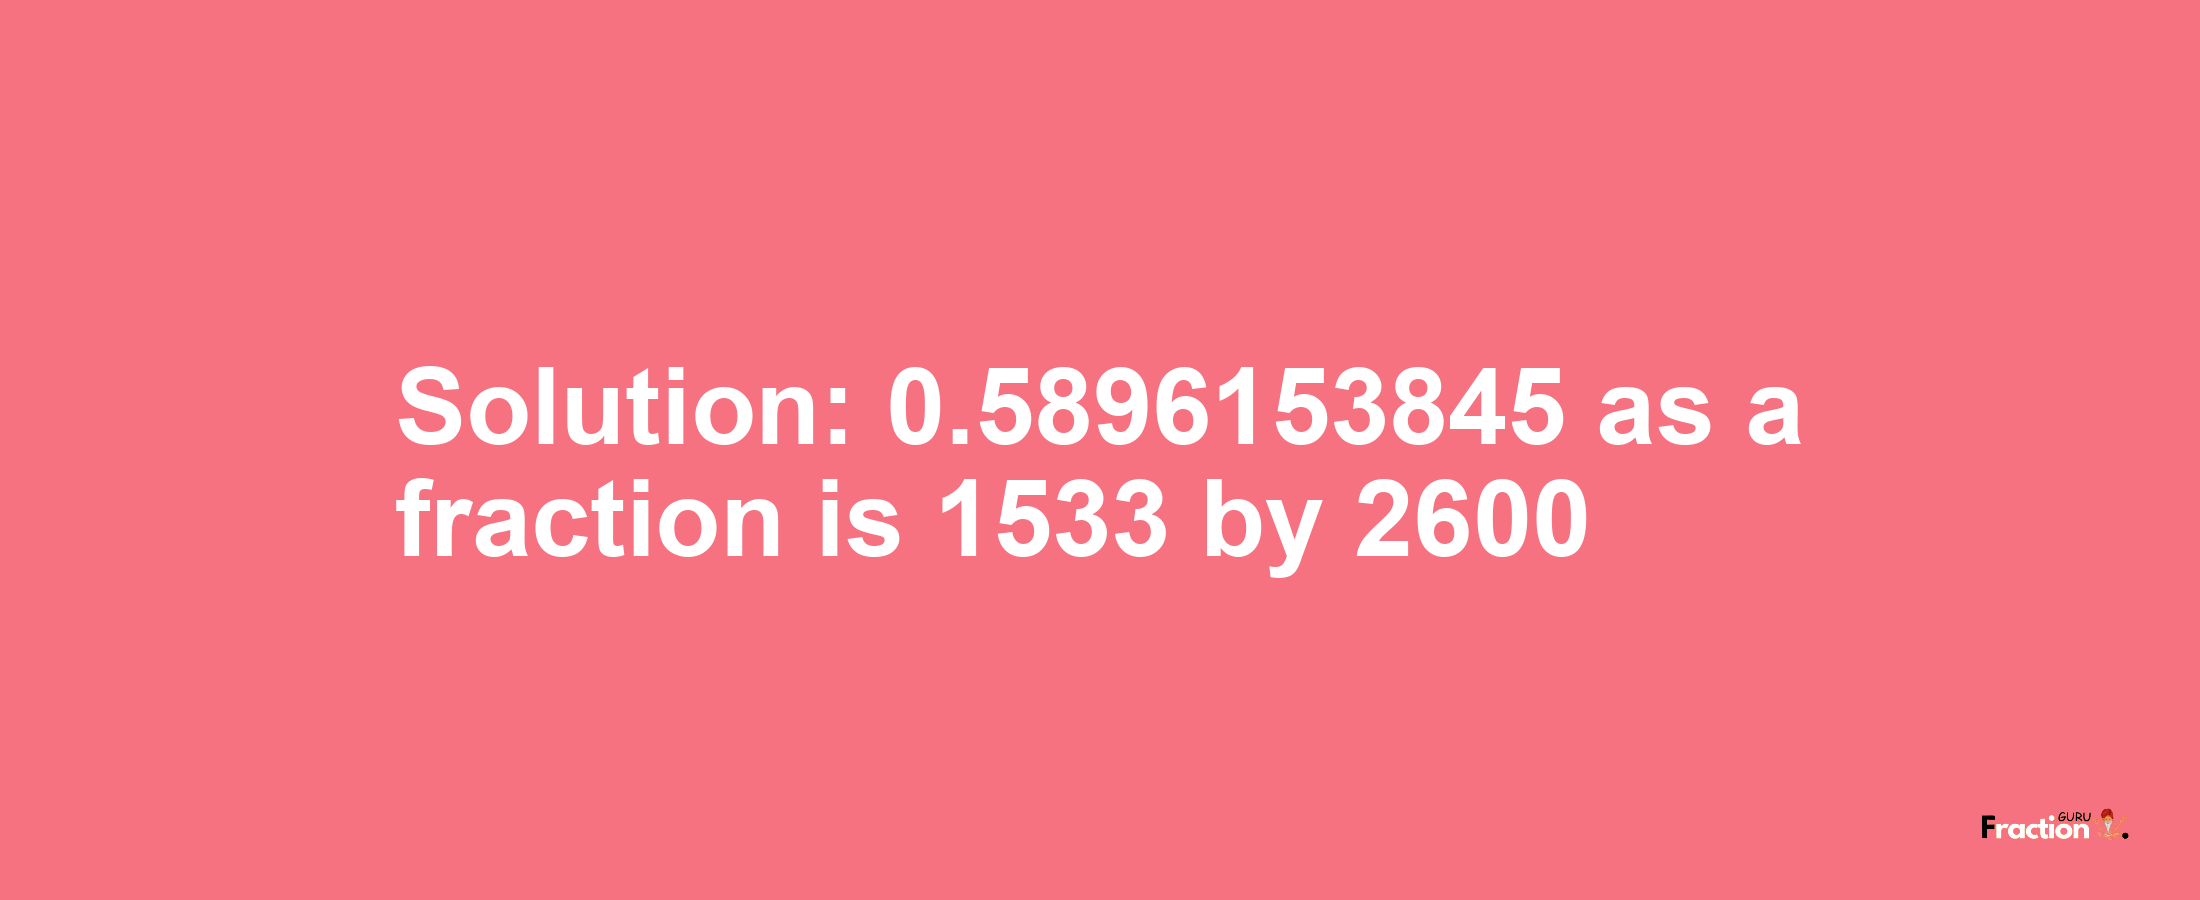 Solution:0.5896153845 as a fraction is 1533/2600